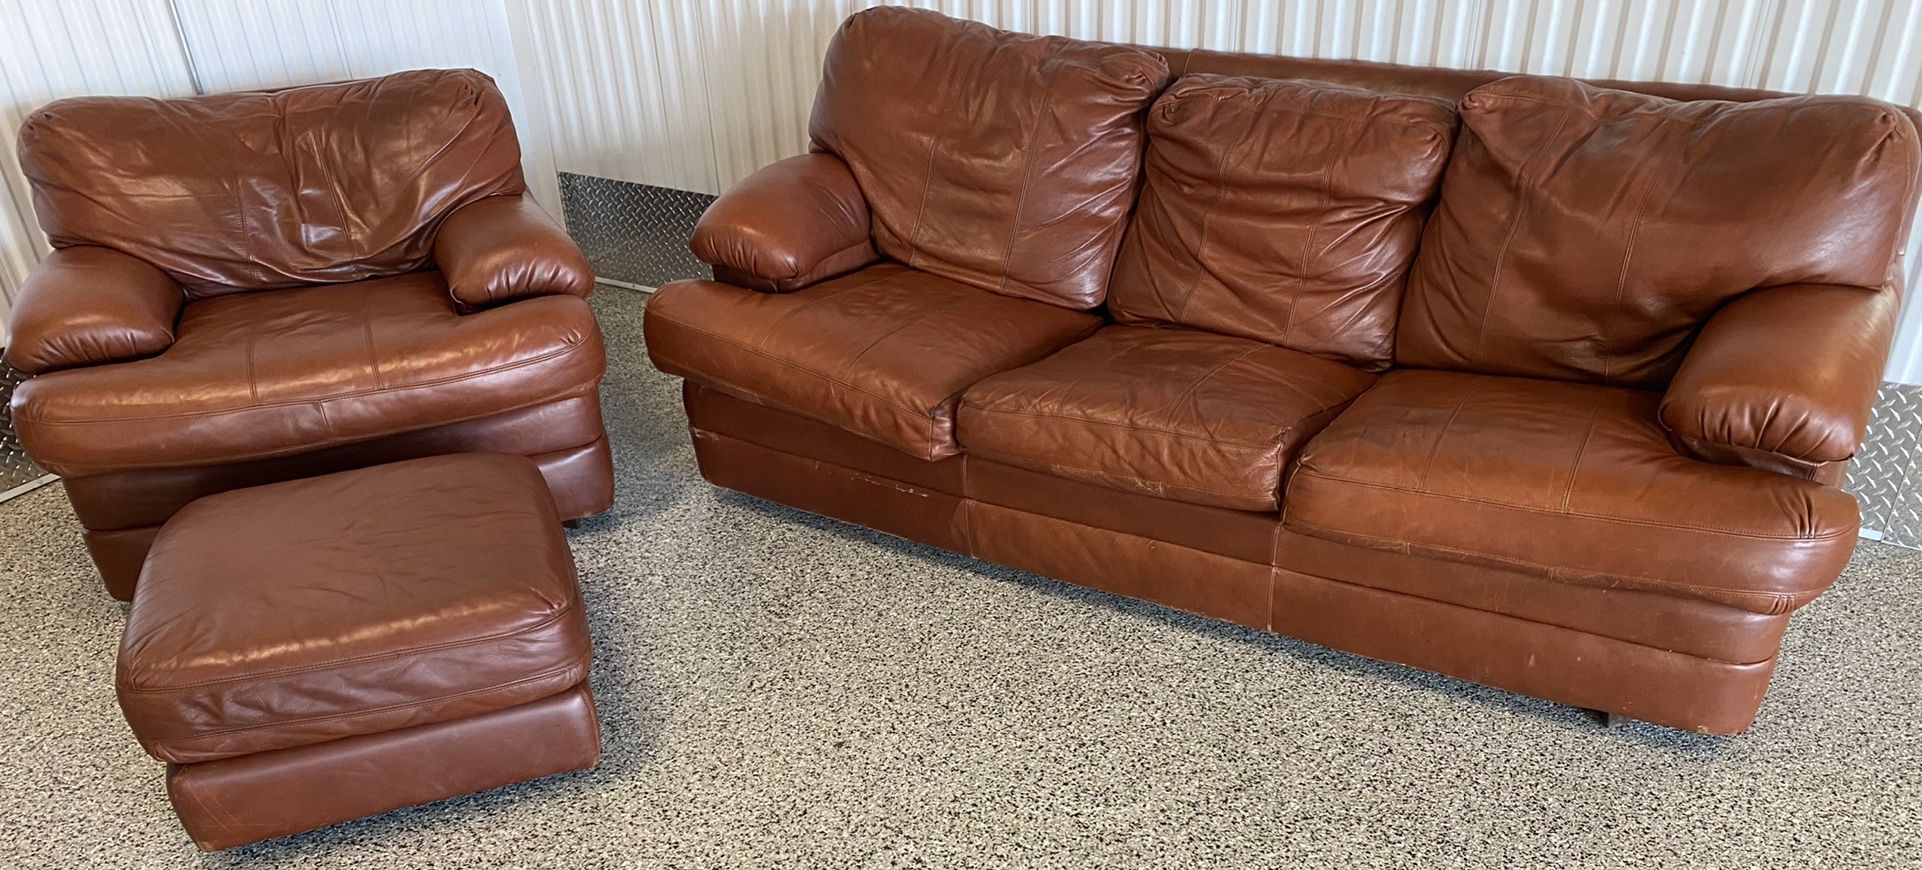 Need Gone - Brown Leather Couch Set w/Ottoman + Hide A Bed